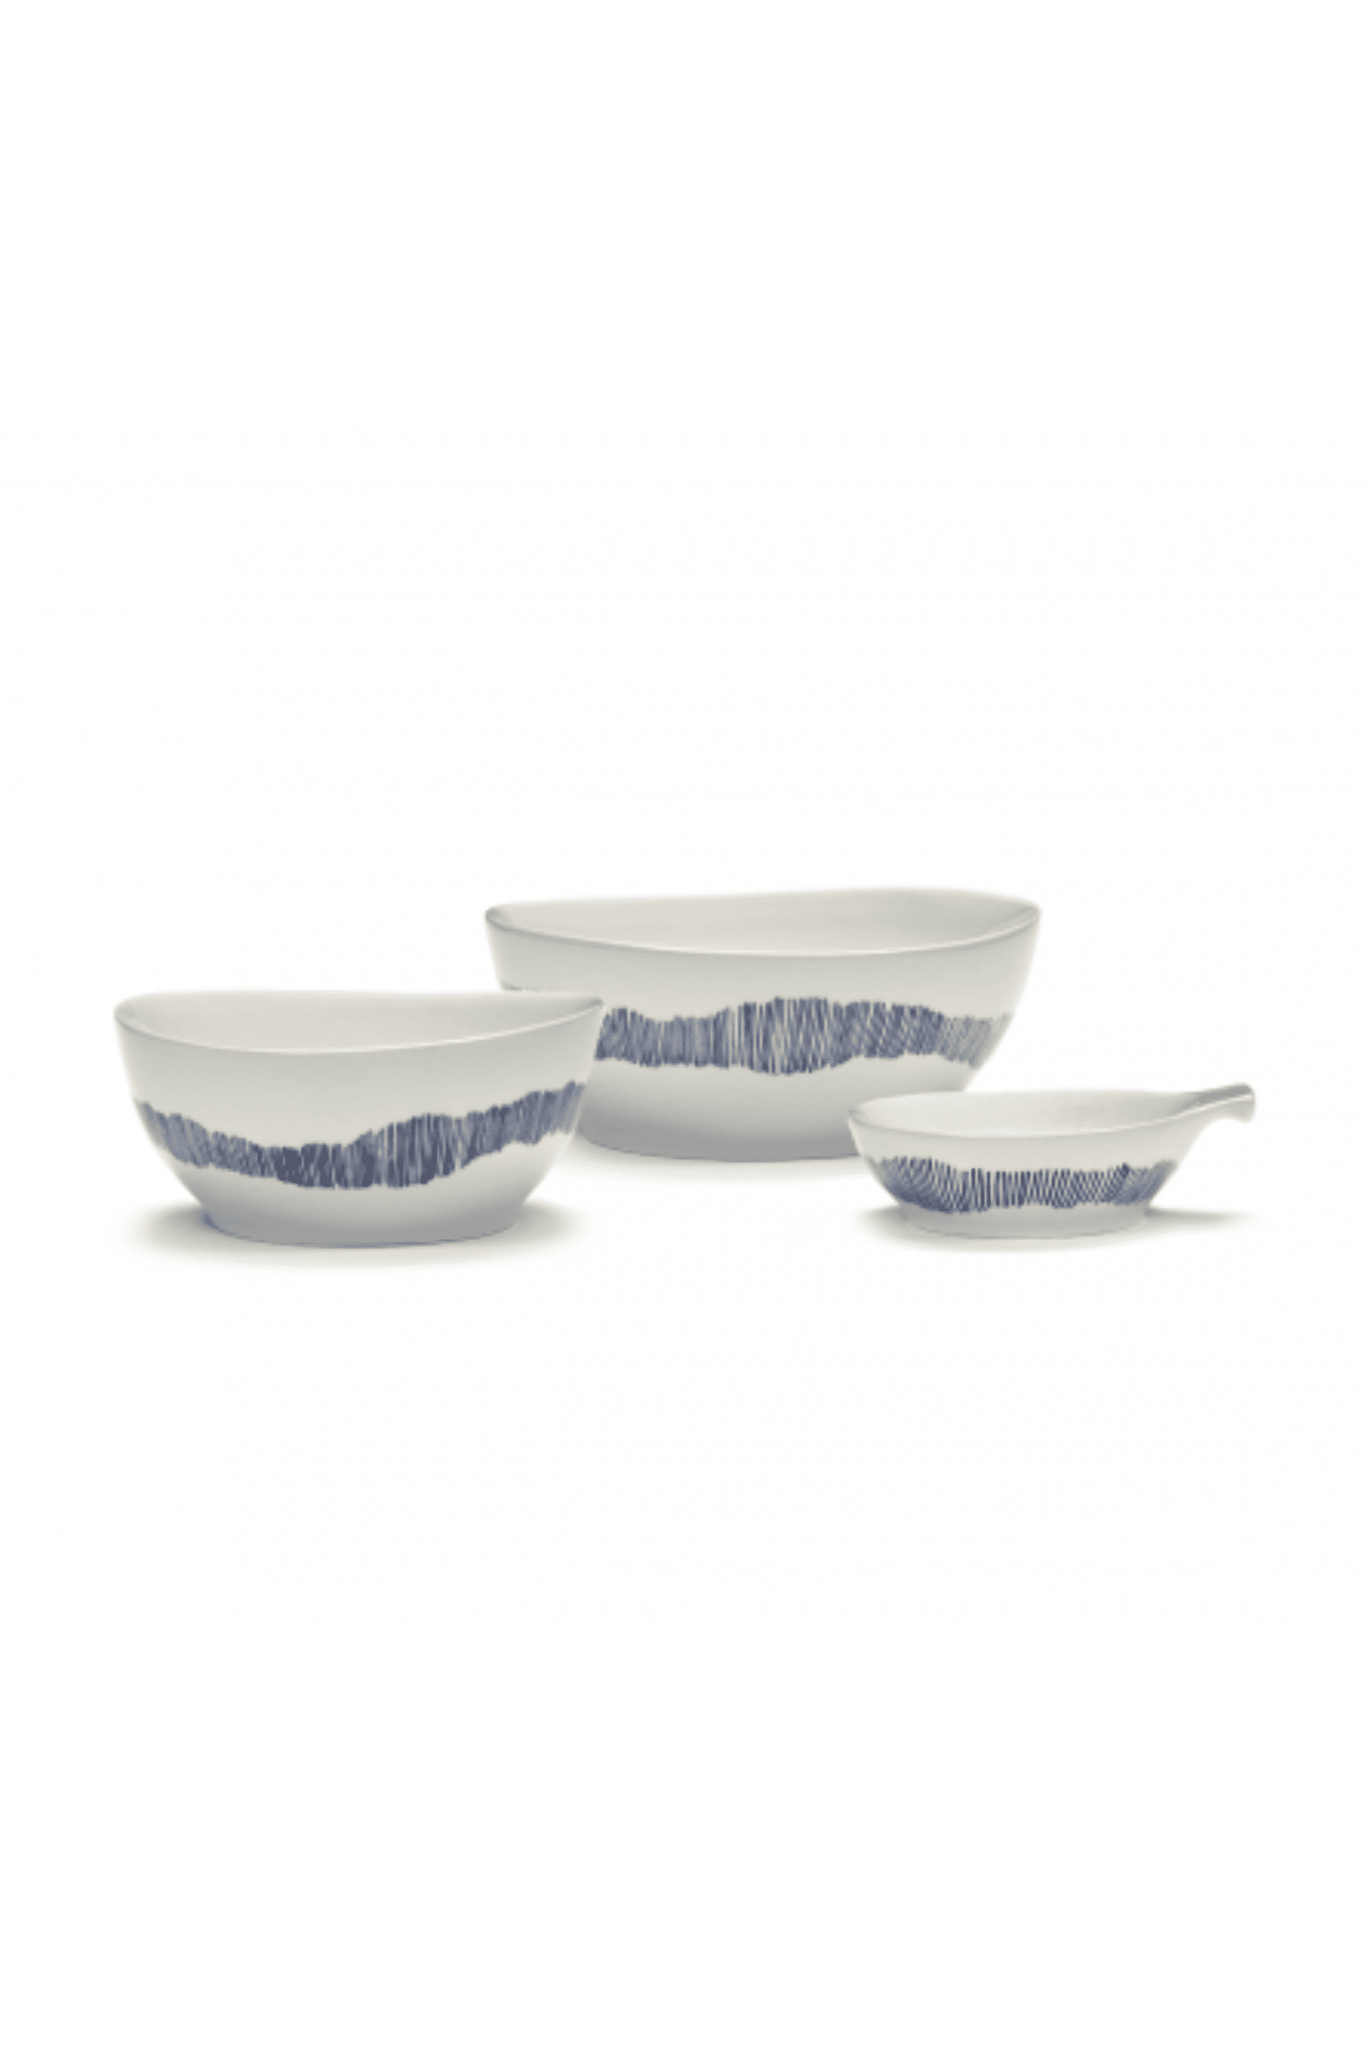 Small Bowl, White Swirl with Blue Stripes Ottolenghi Serax, shown with various bowls